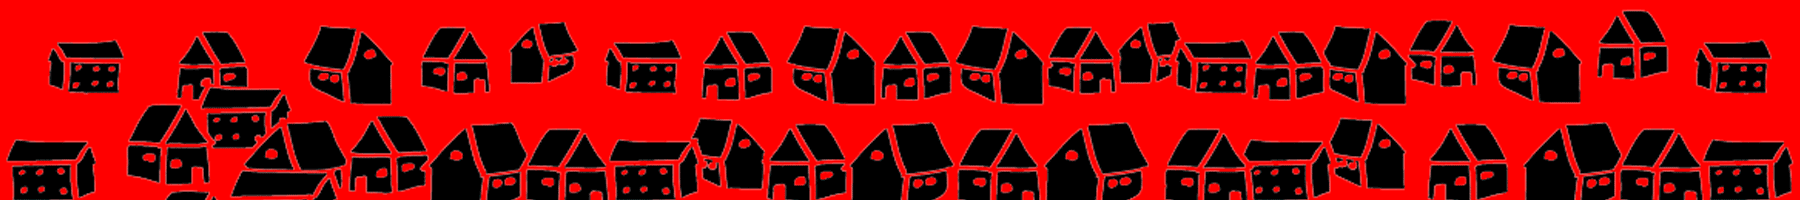 Small black houses drawn on a red background